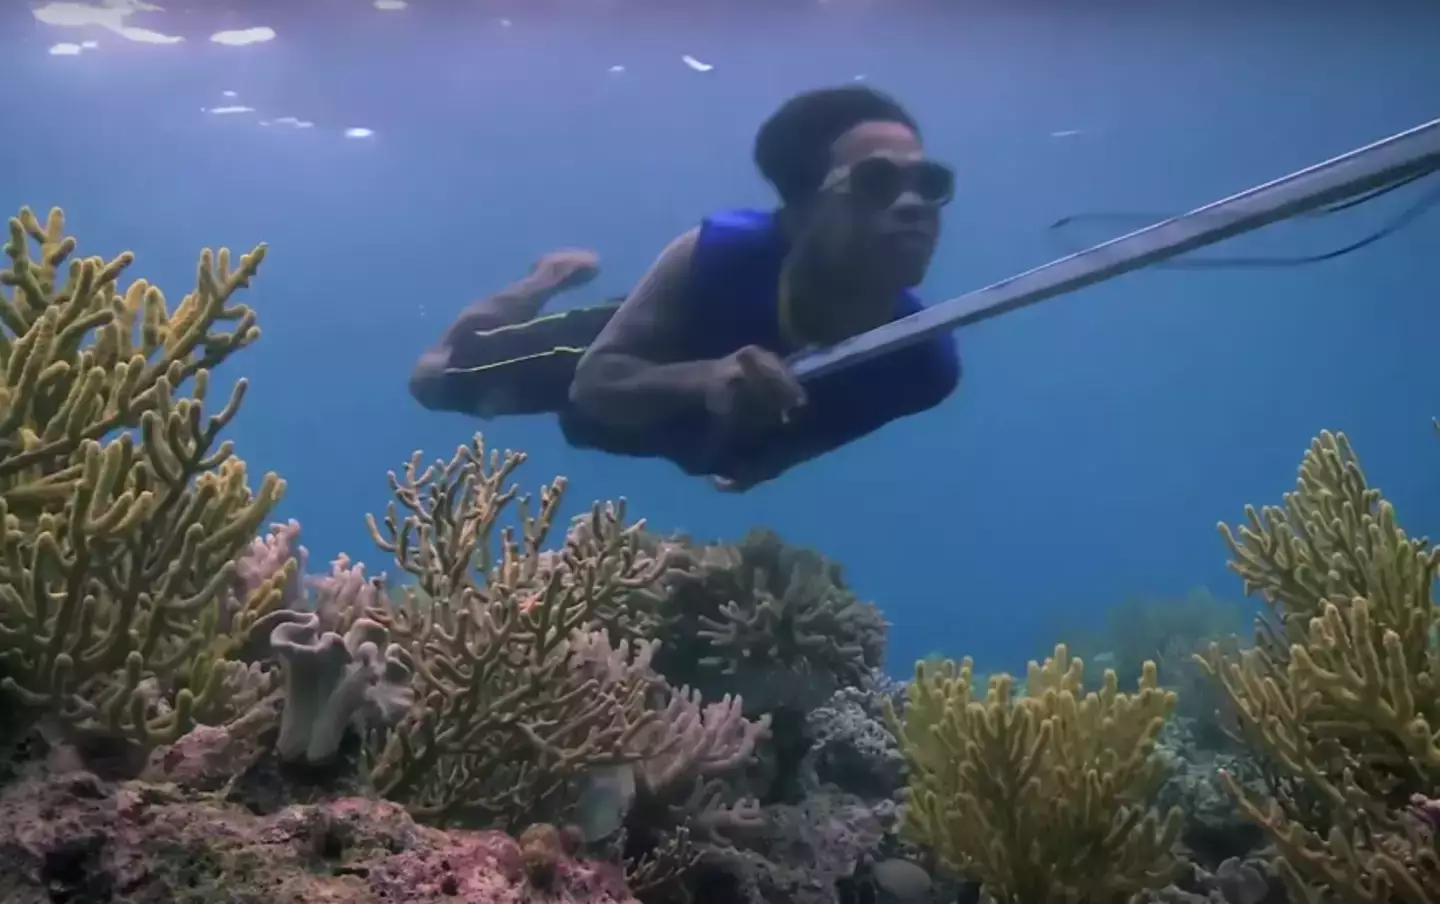 Diving down with wooden goggles and weights around their wastes, the Bajau have lived for countless generations off the produce of the sea. (BBC Global/YouTube)